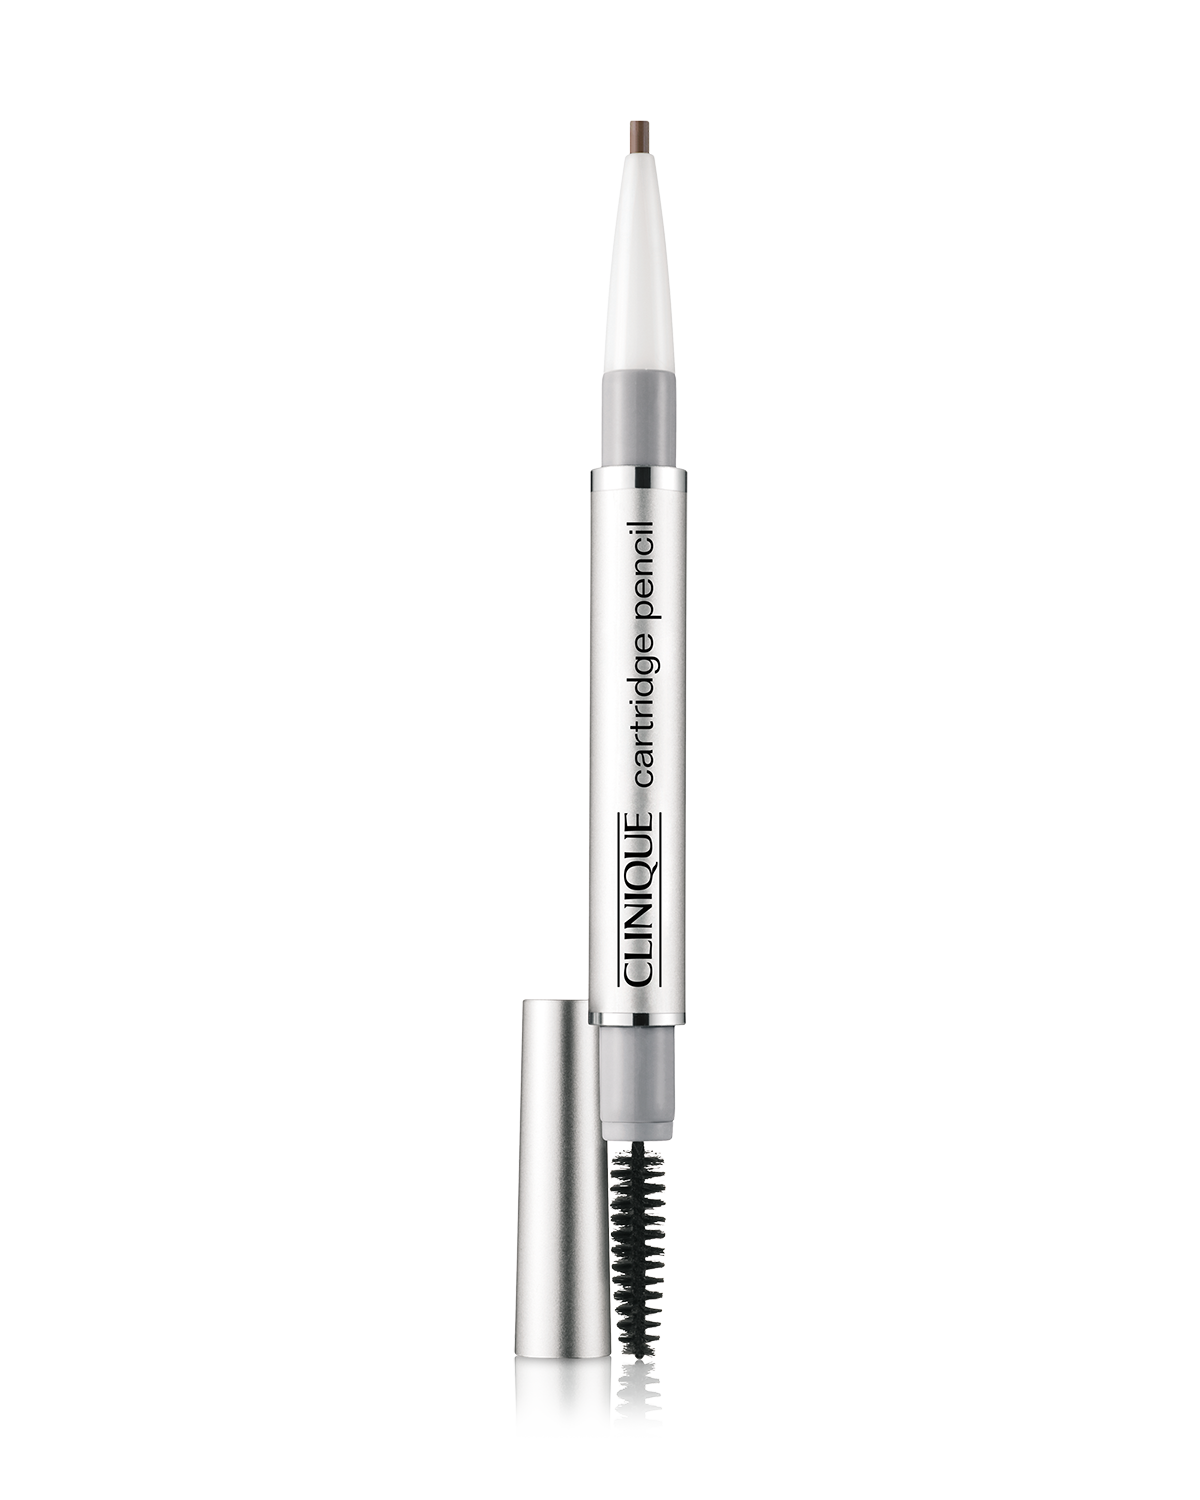 Cartridge Pencil for Brows